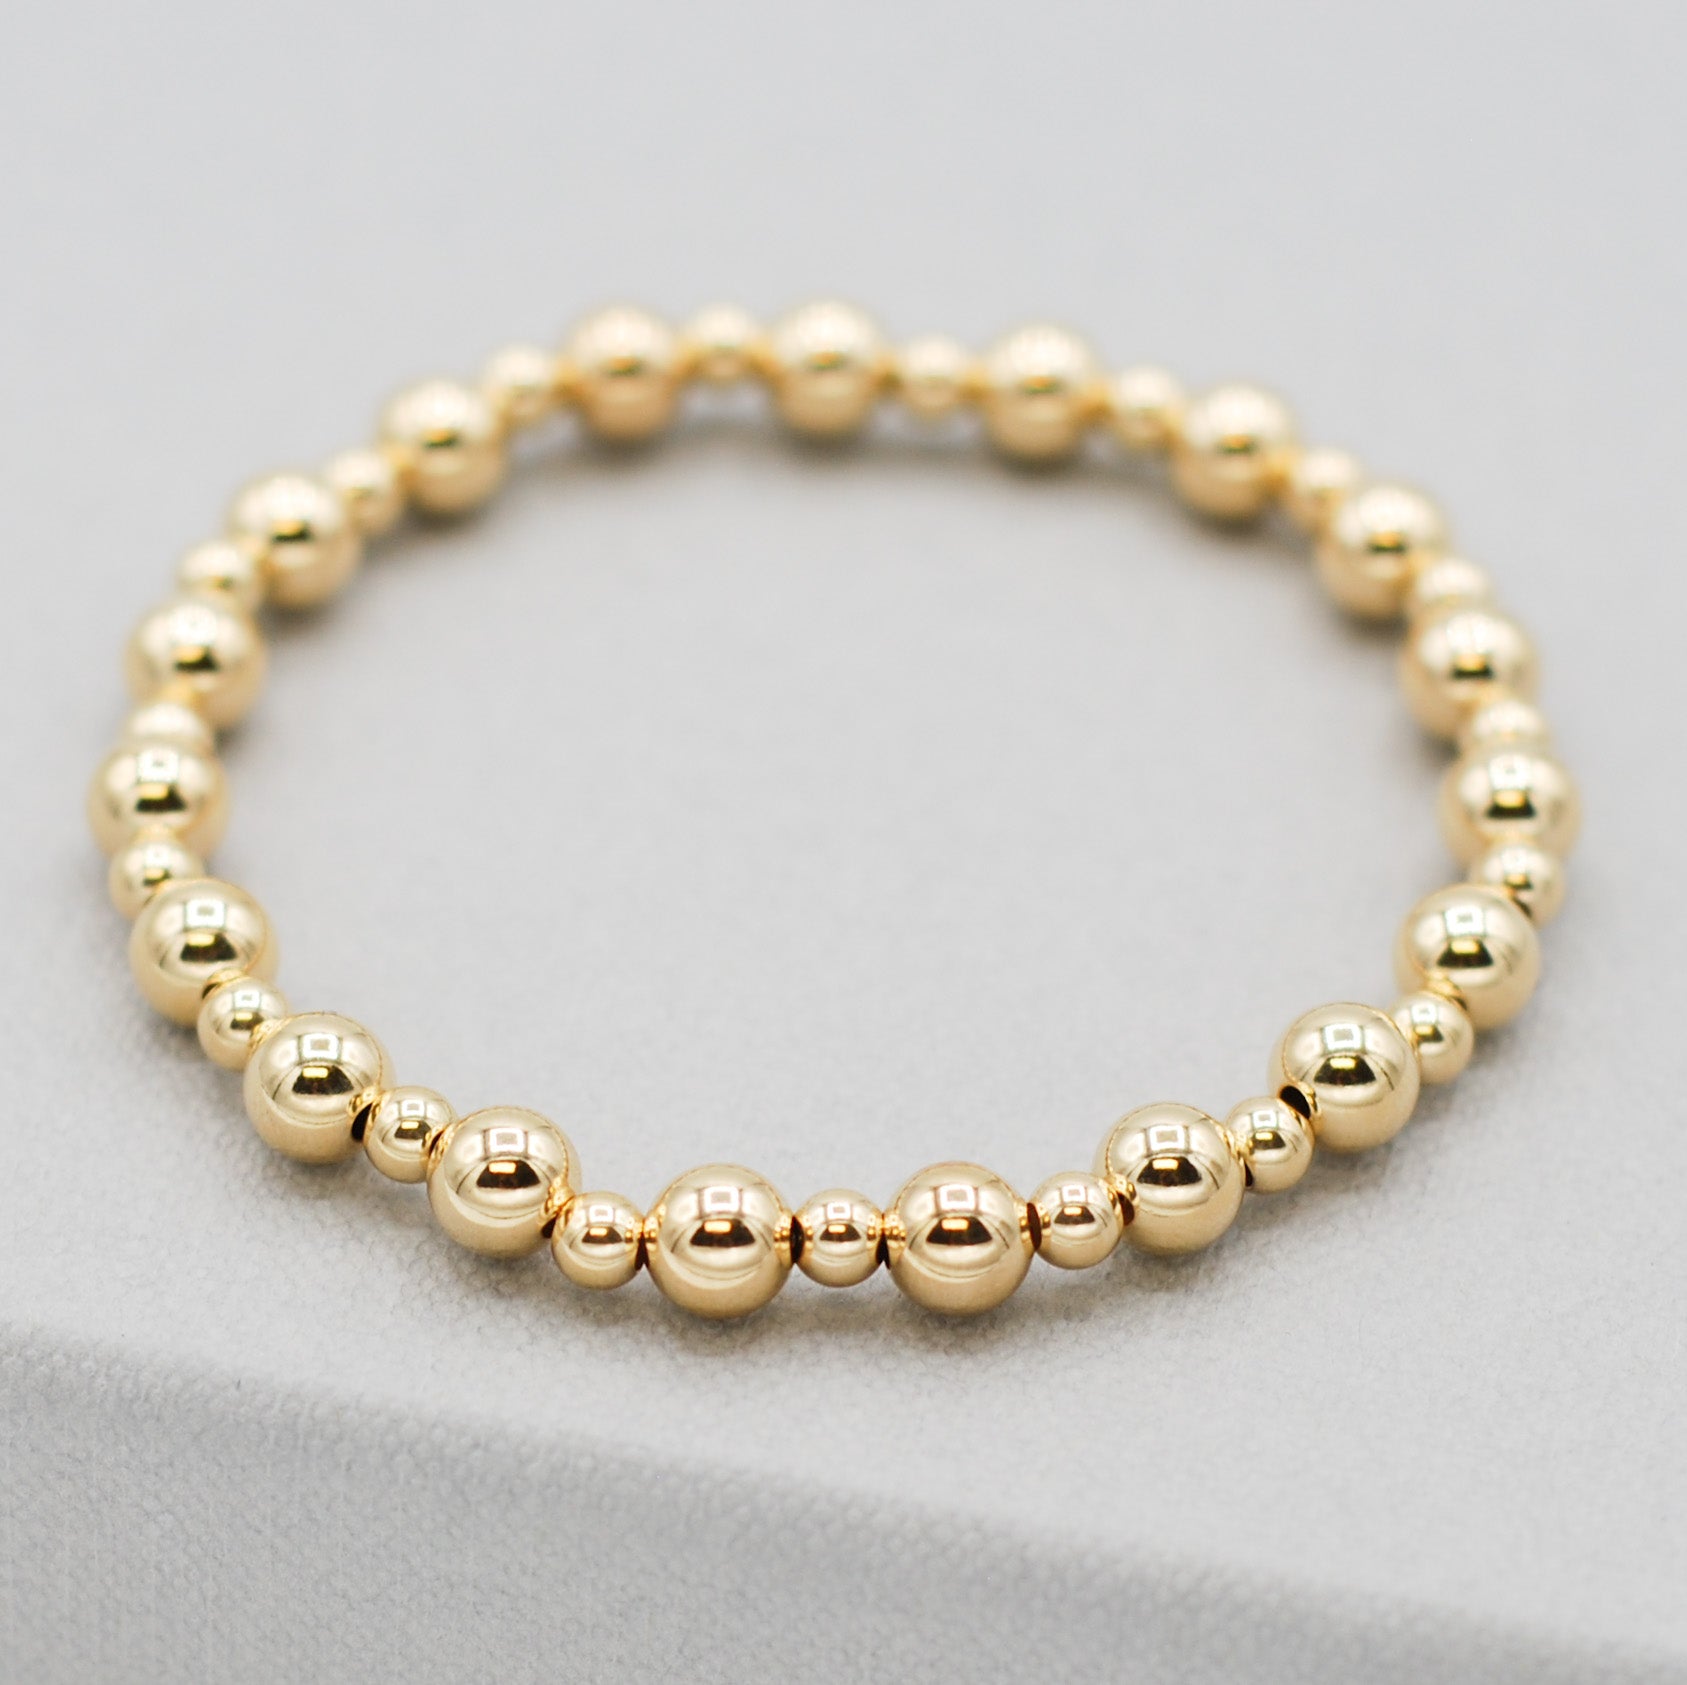 4mm & 6mm Beaded Lux Station Bracelet Average (7 Inches)